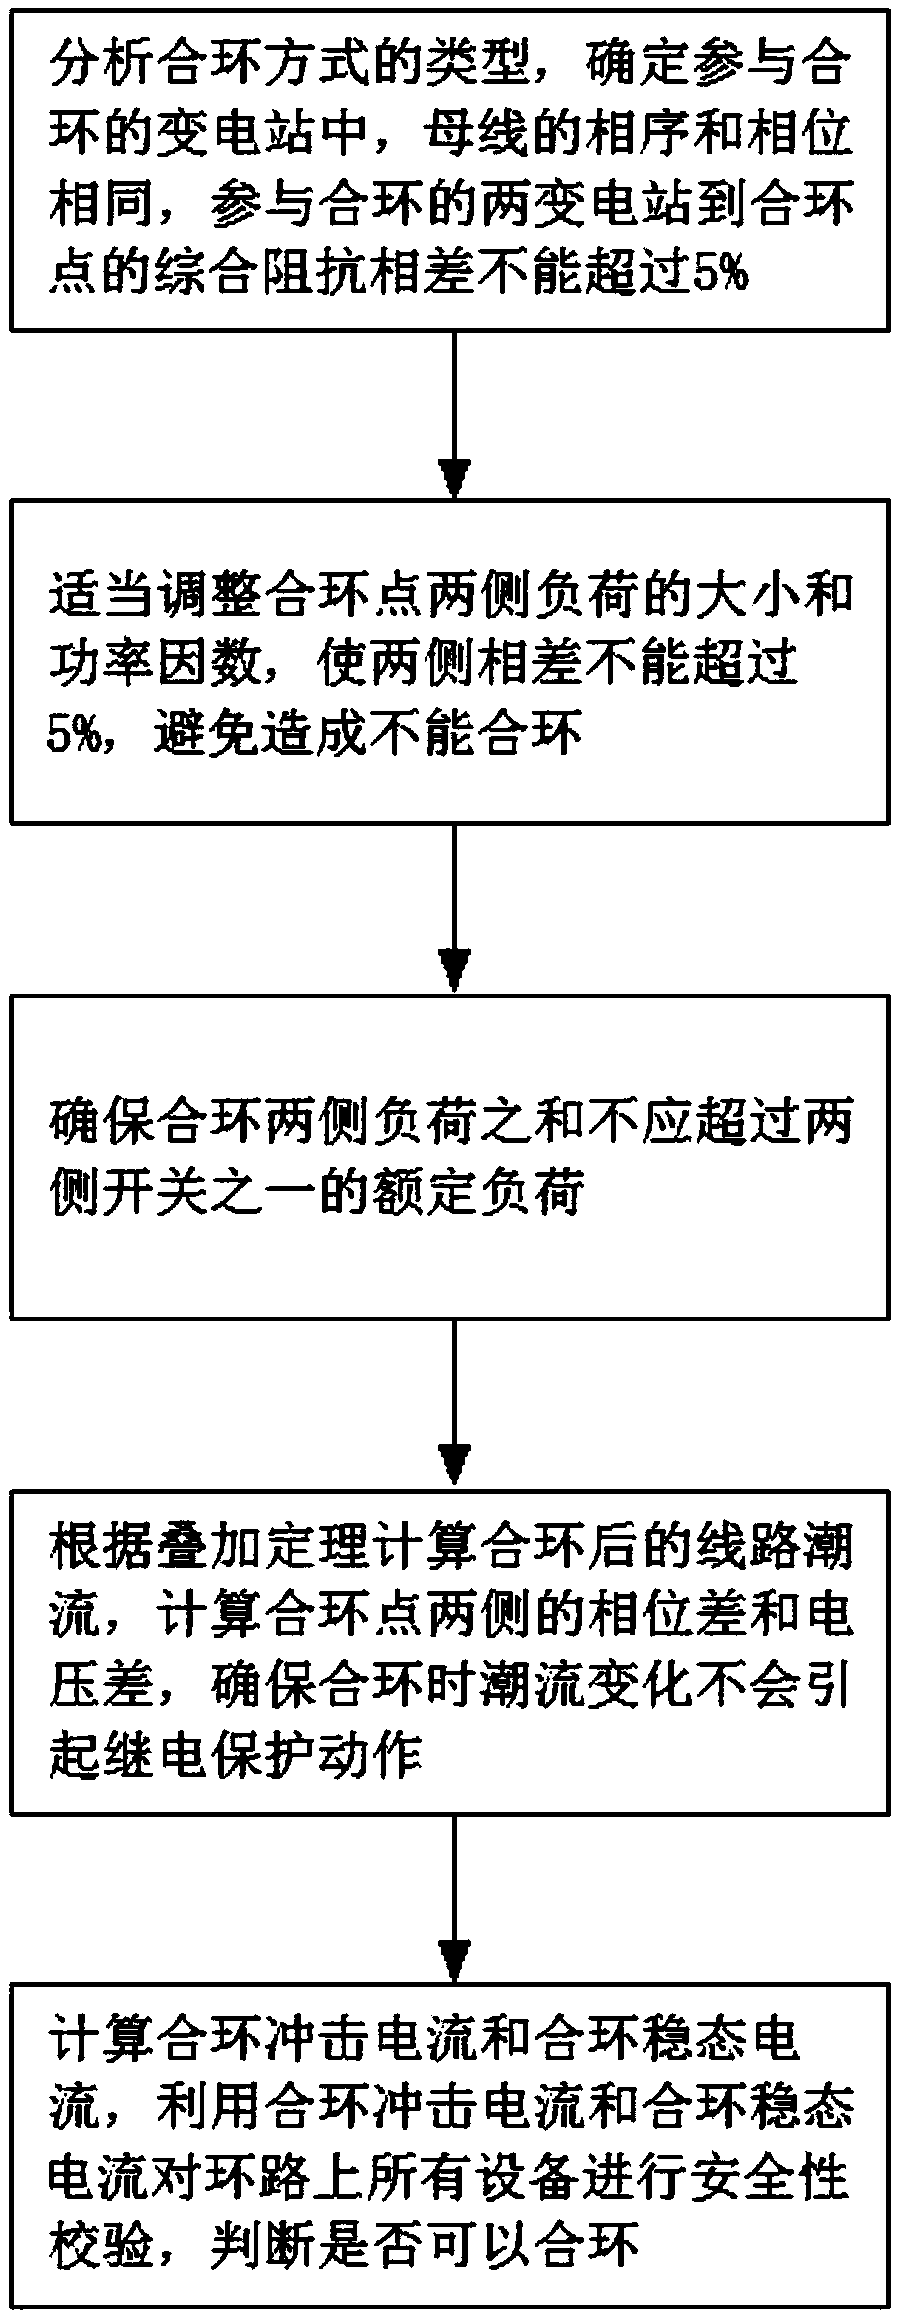 Loop closing power supply operation risk assessment method for power distribution network